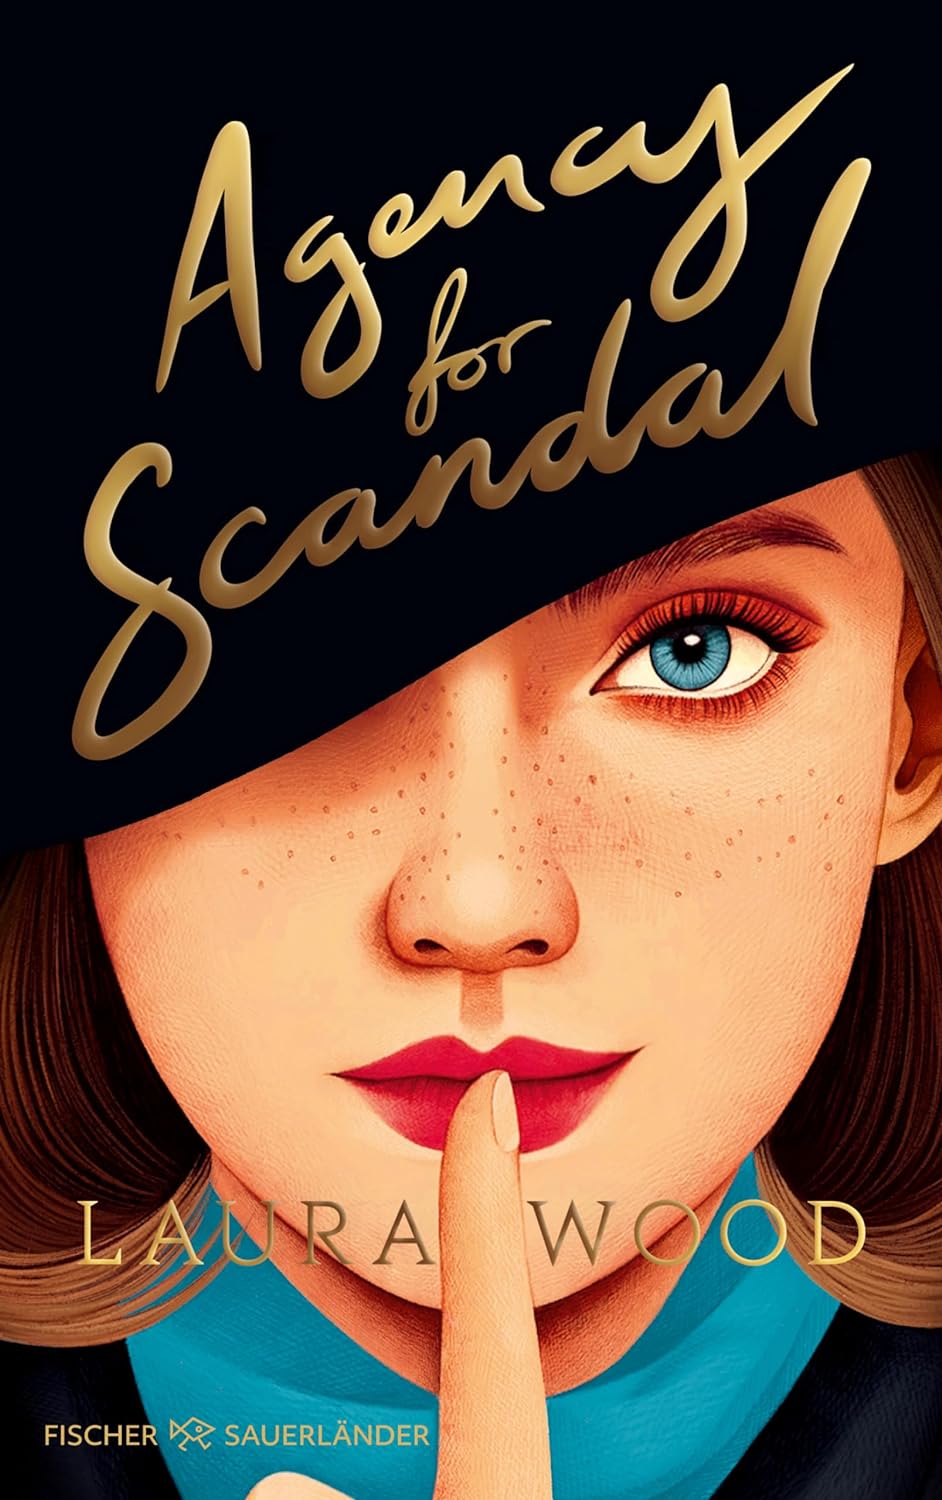 Laura Wood - Agency for Scandal